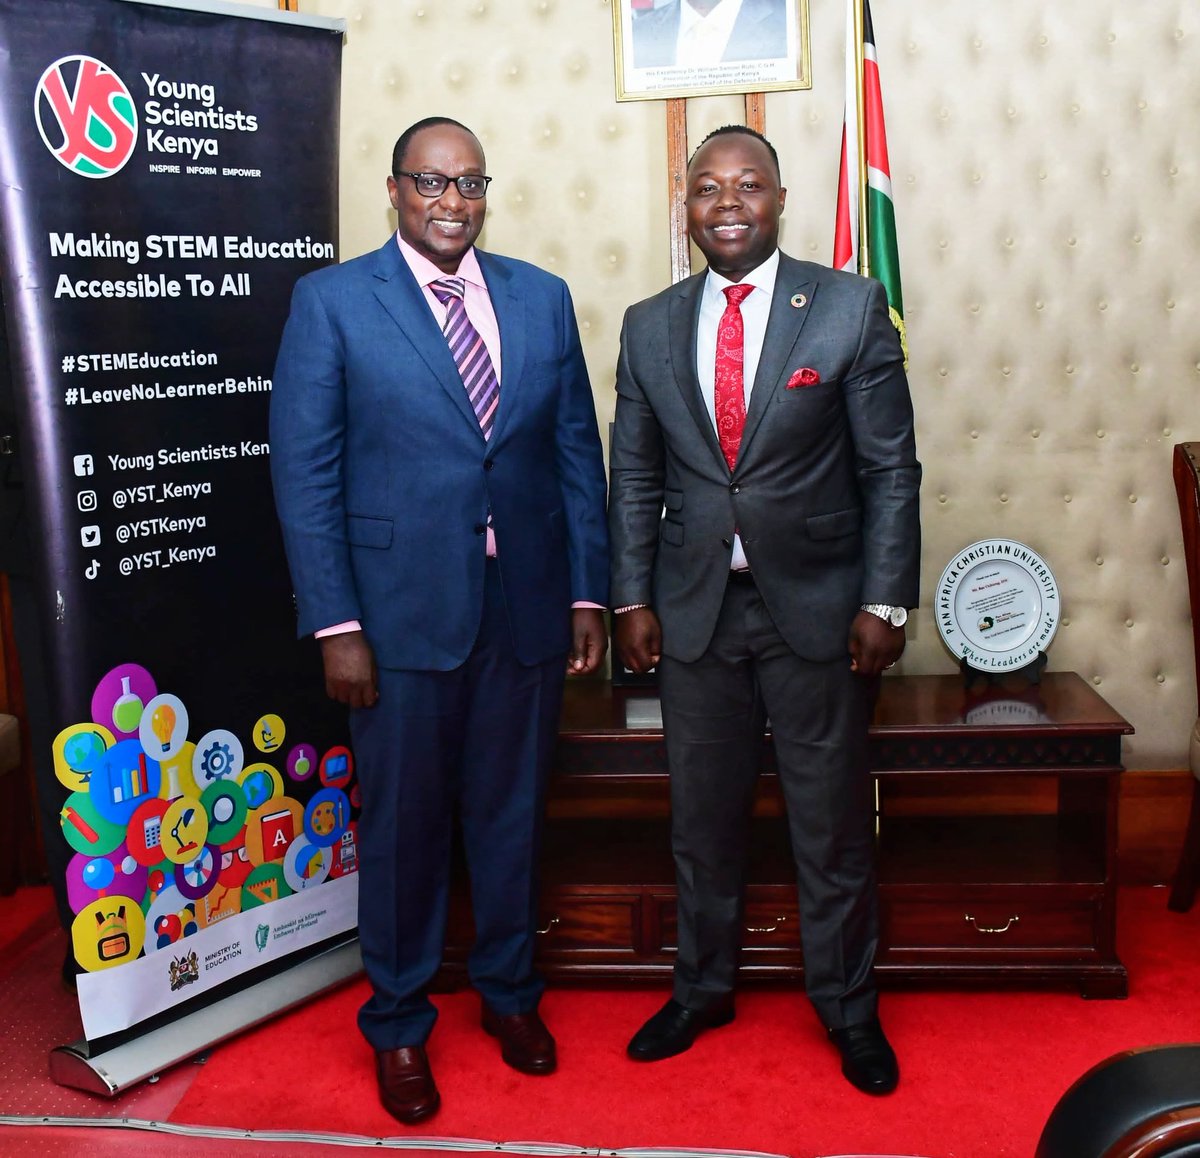 @YSTKenya team paid a courtesy visit to @SDY_Ke office today, meeting The Secretary @rochieng Discussions around the need to embedd a culture of innovation in our students emerged & an avenue to collaborate on matters innovation, entrepreneurship & mentorship through the office